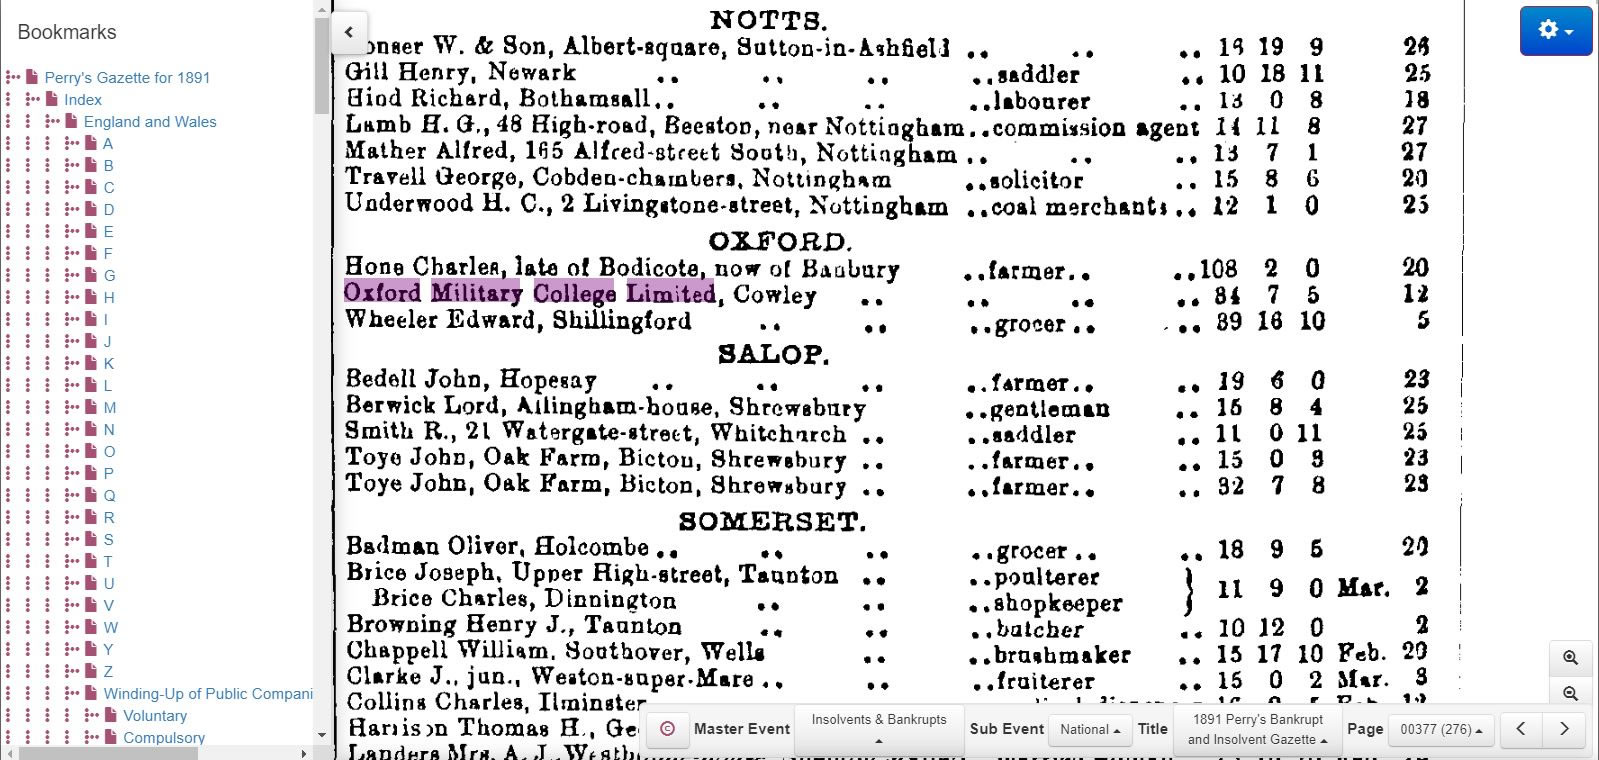 Perry's Gazette 1891 from TheGenealogist's Insolvents & Bankrupts records